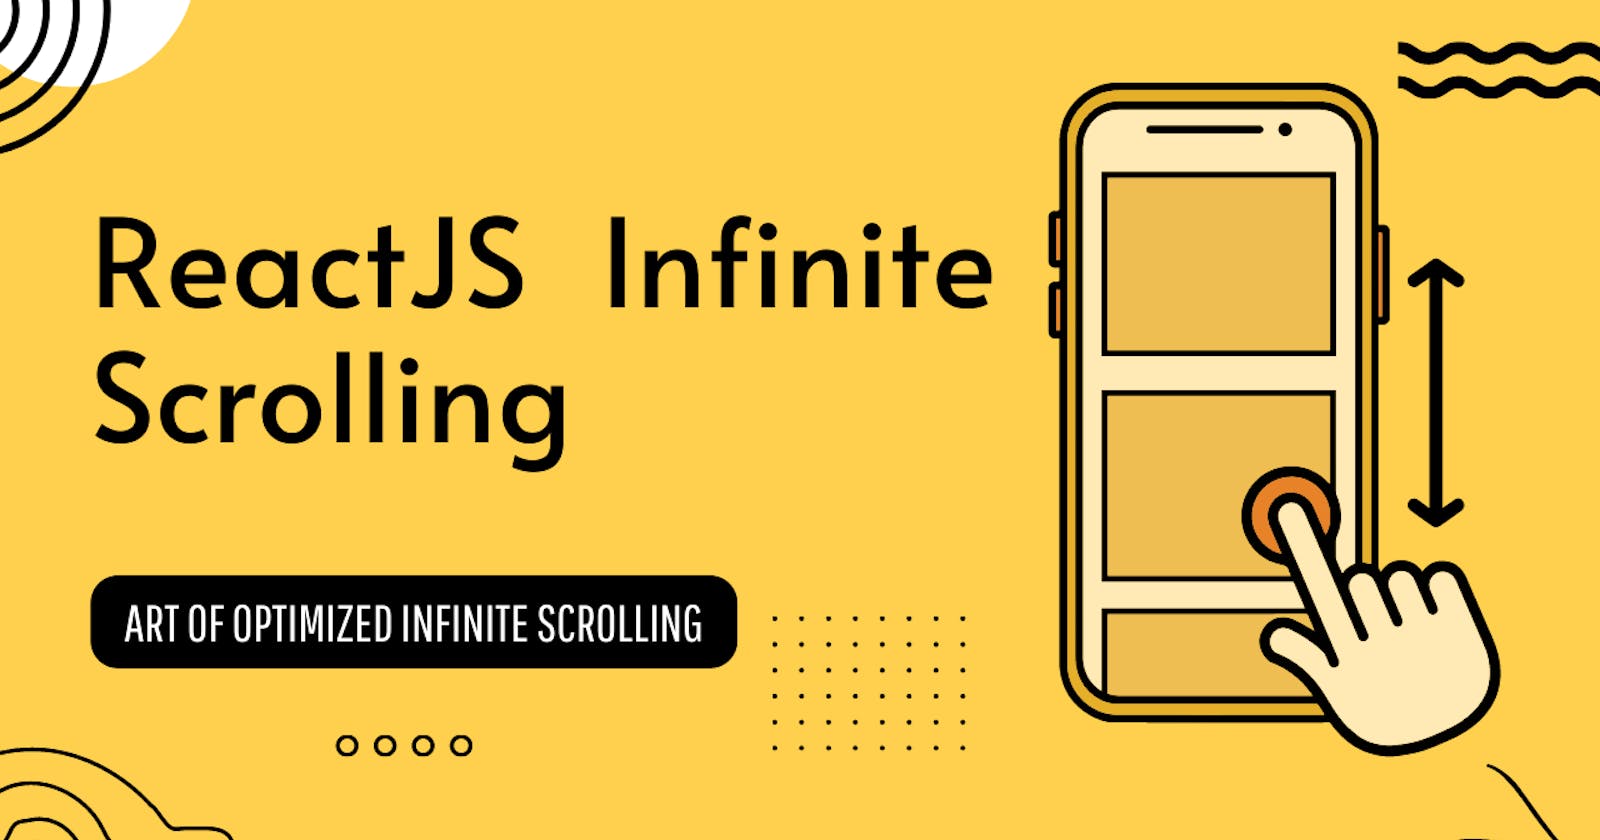 Supercharge Your ReactJS App with Optimized Infinite Scrolling